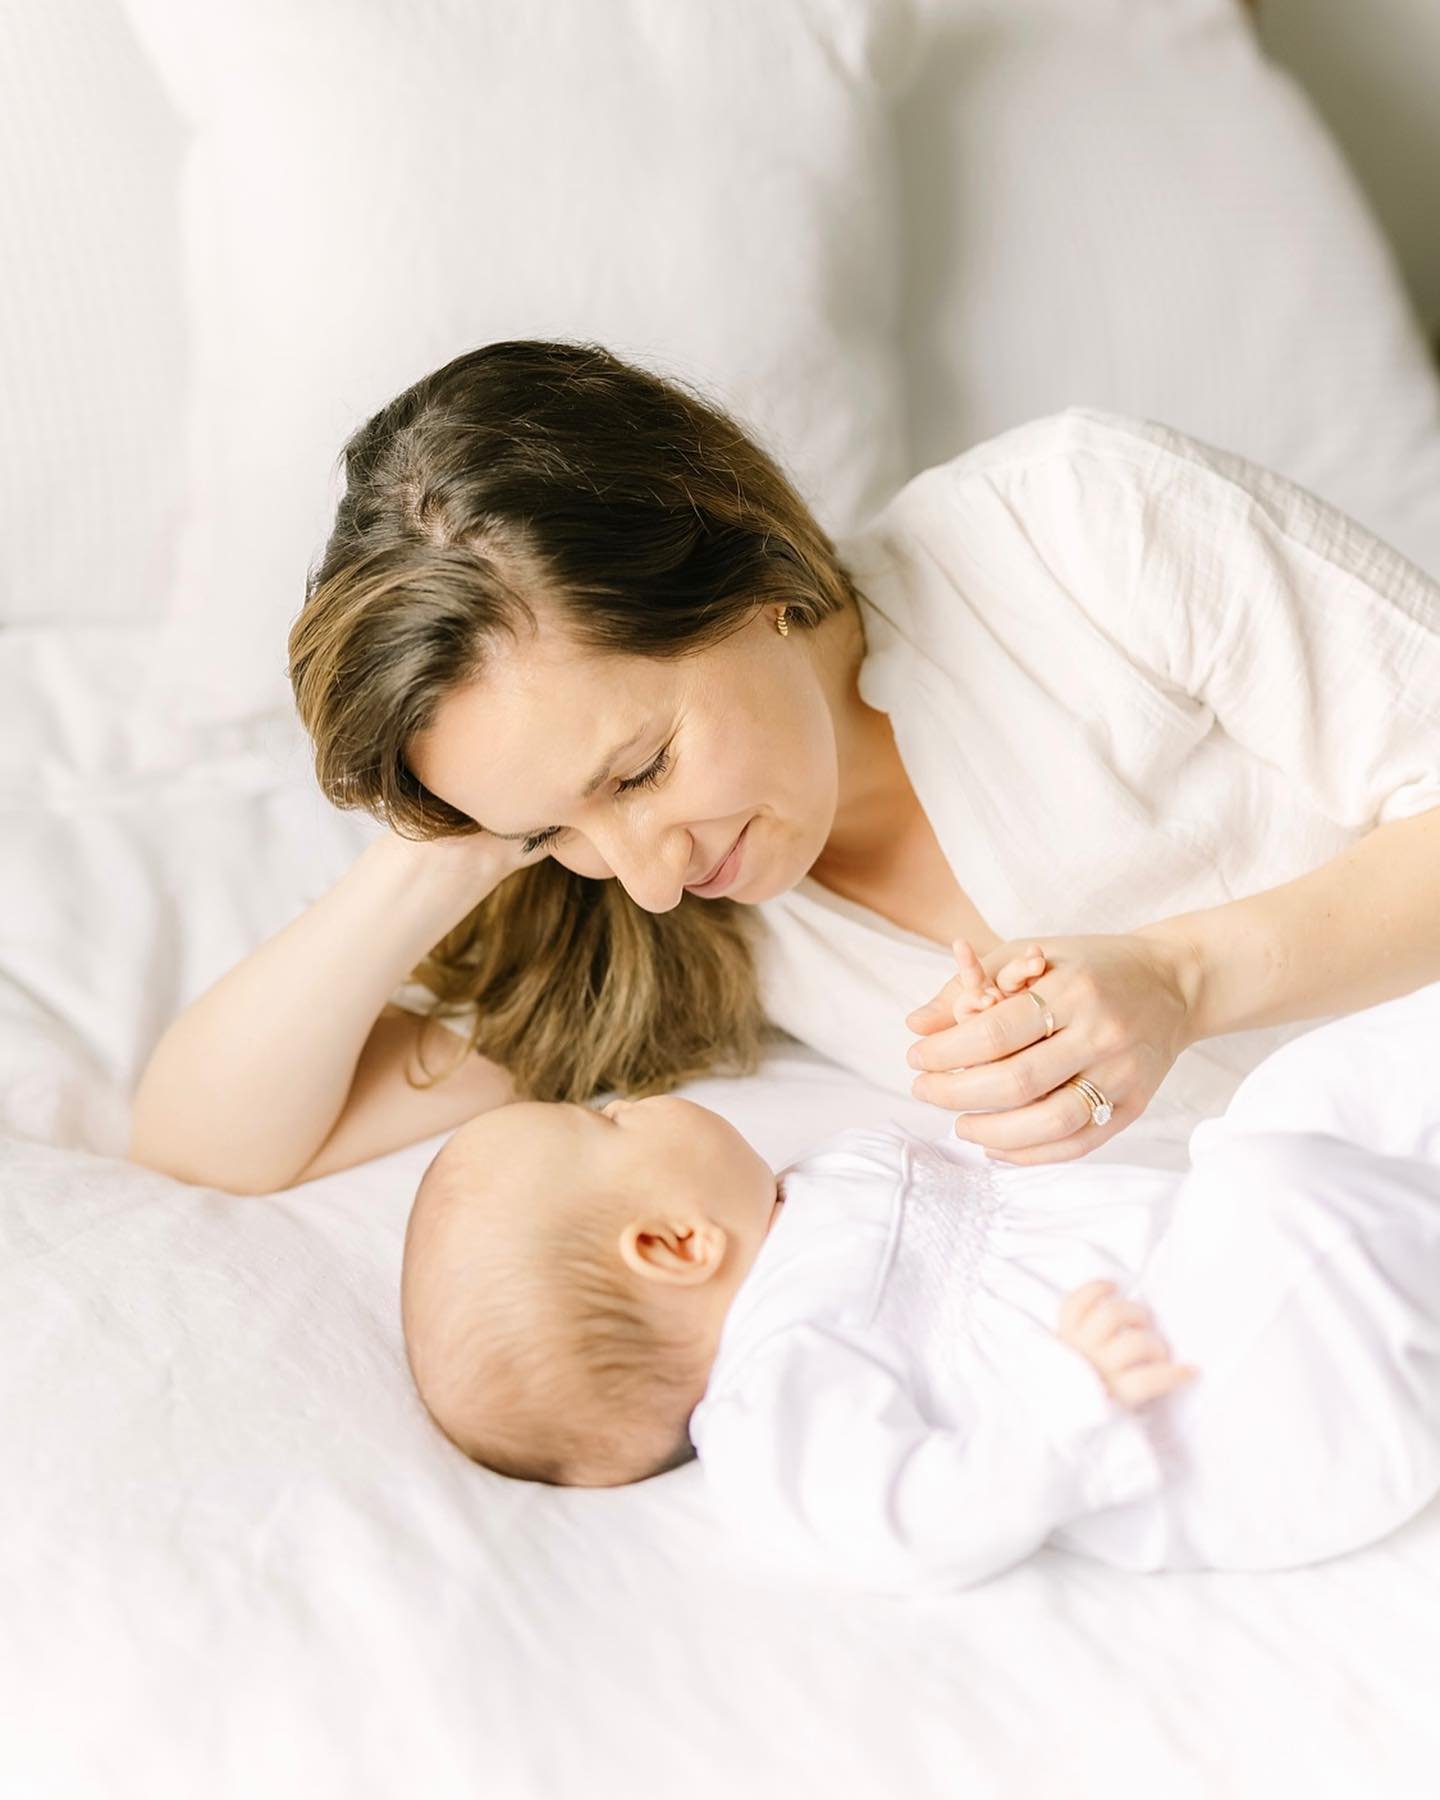 There&rsquo;s a timeless beauty in the simplicity of natural newborn sessions &mdash; no frills, no fuss, just the raw, unfiltered love between parent and child. When you highlight this bond with beautiful window light, love truly then becomes a work